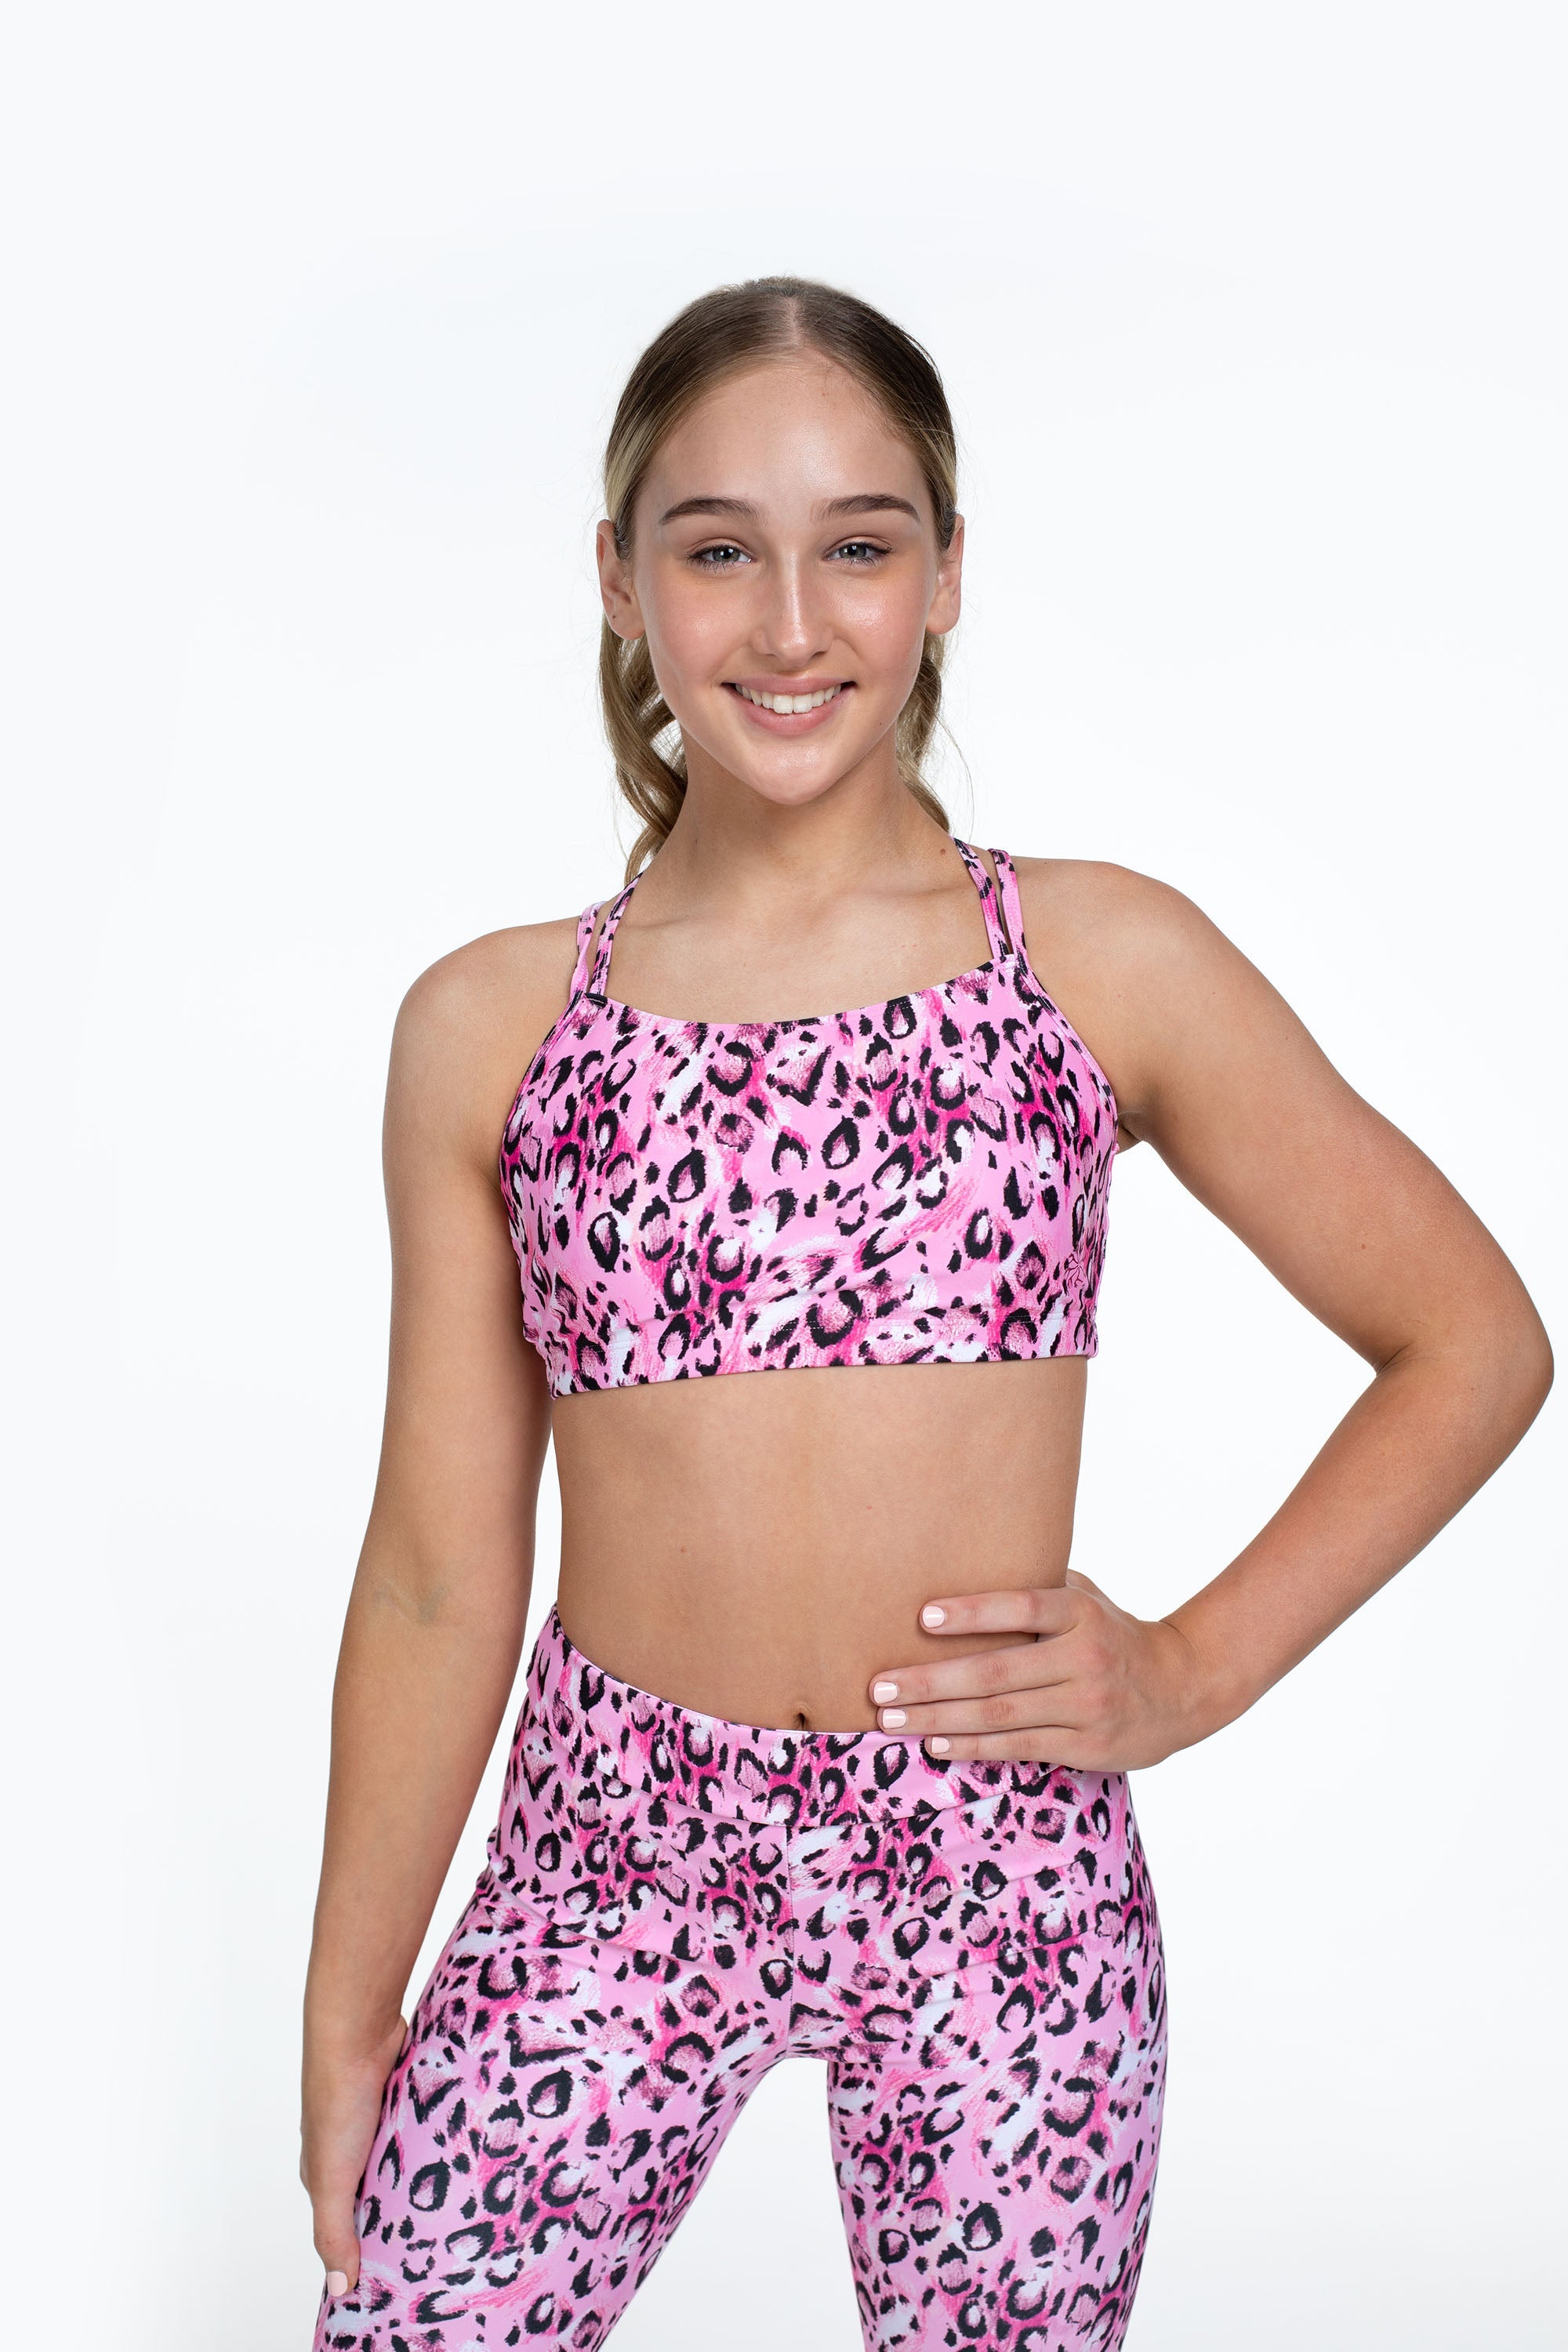 Bloch x Flo Active Shelby Seamed Cross Back Cropped Tank Top FM1726 – Dance  Essentials Inc.